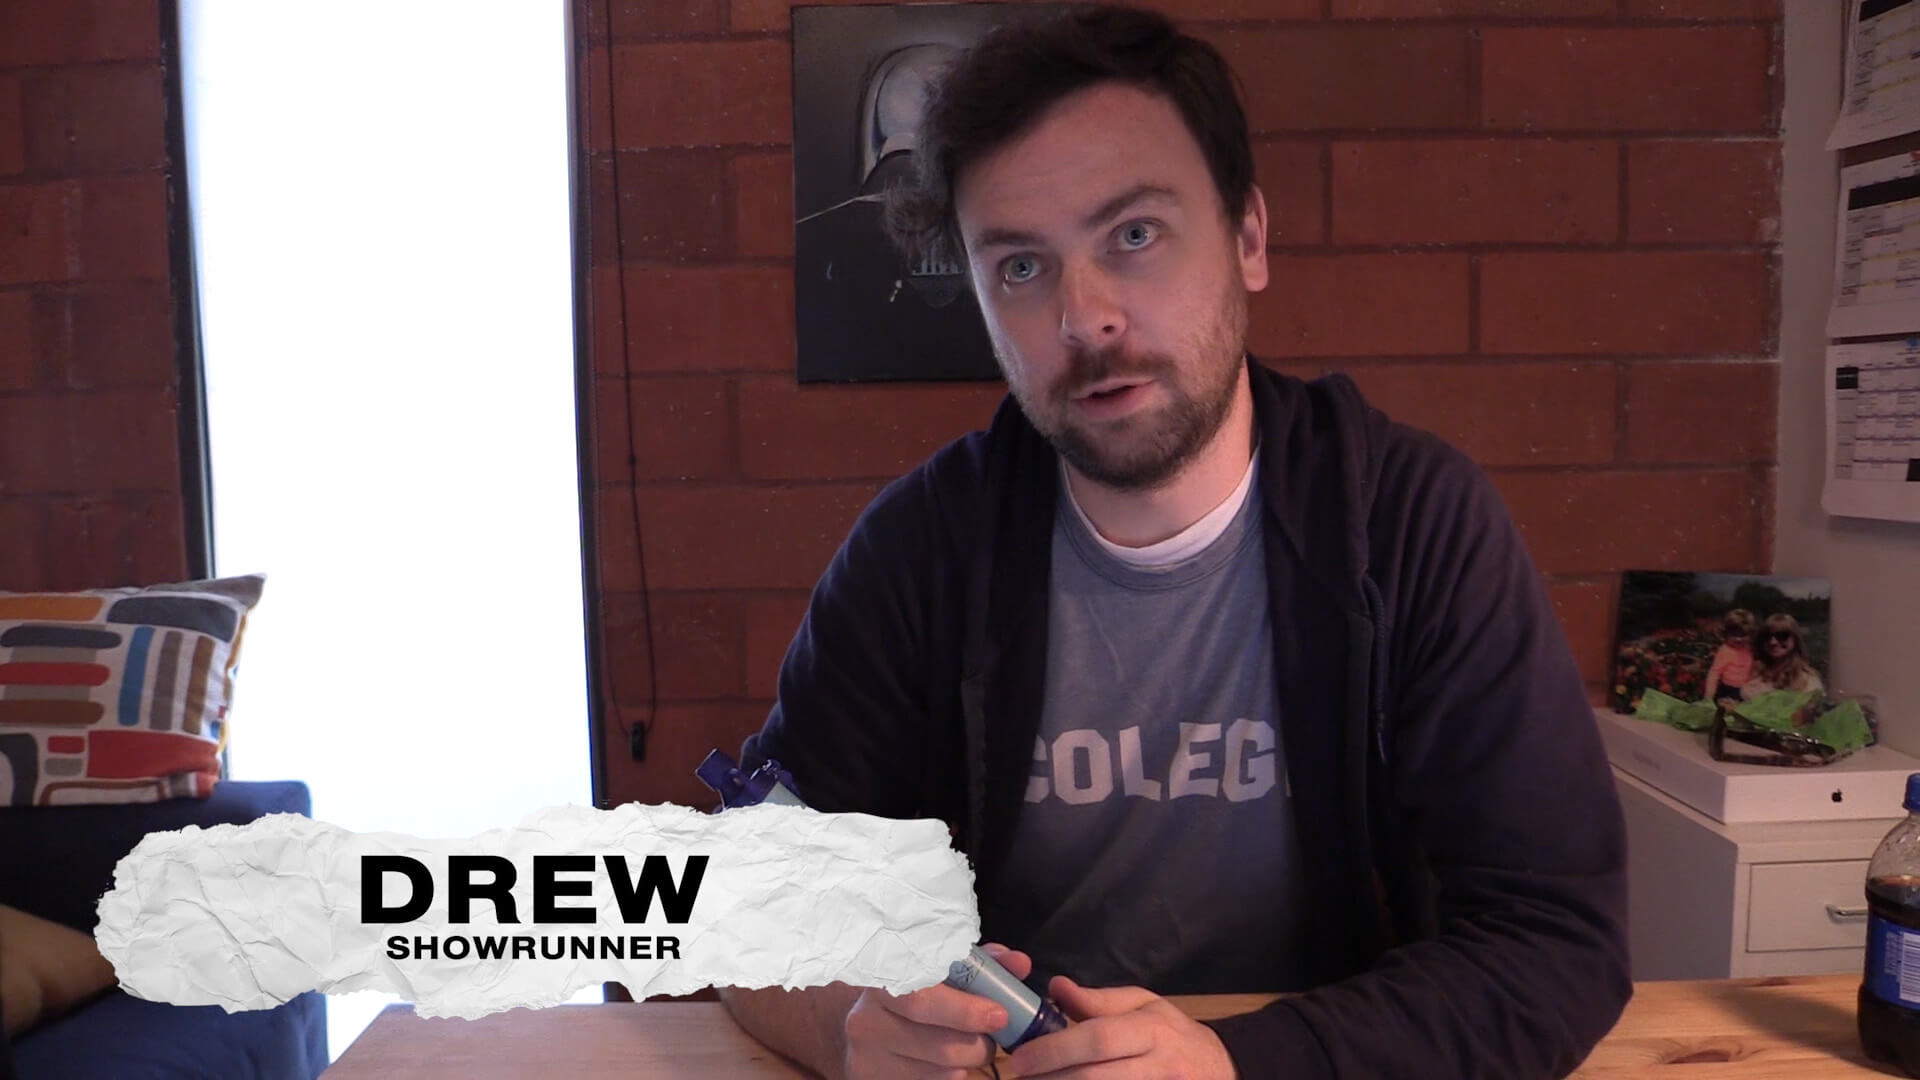 Showrunner Drew Champion appears in a Good Mythical Crew segment produced by Todd Bishop